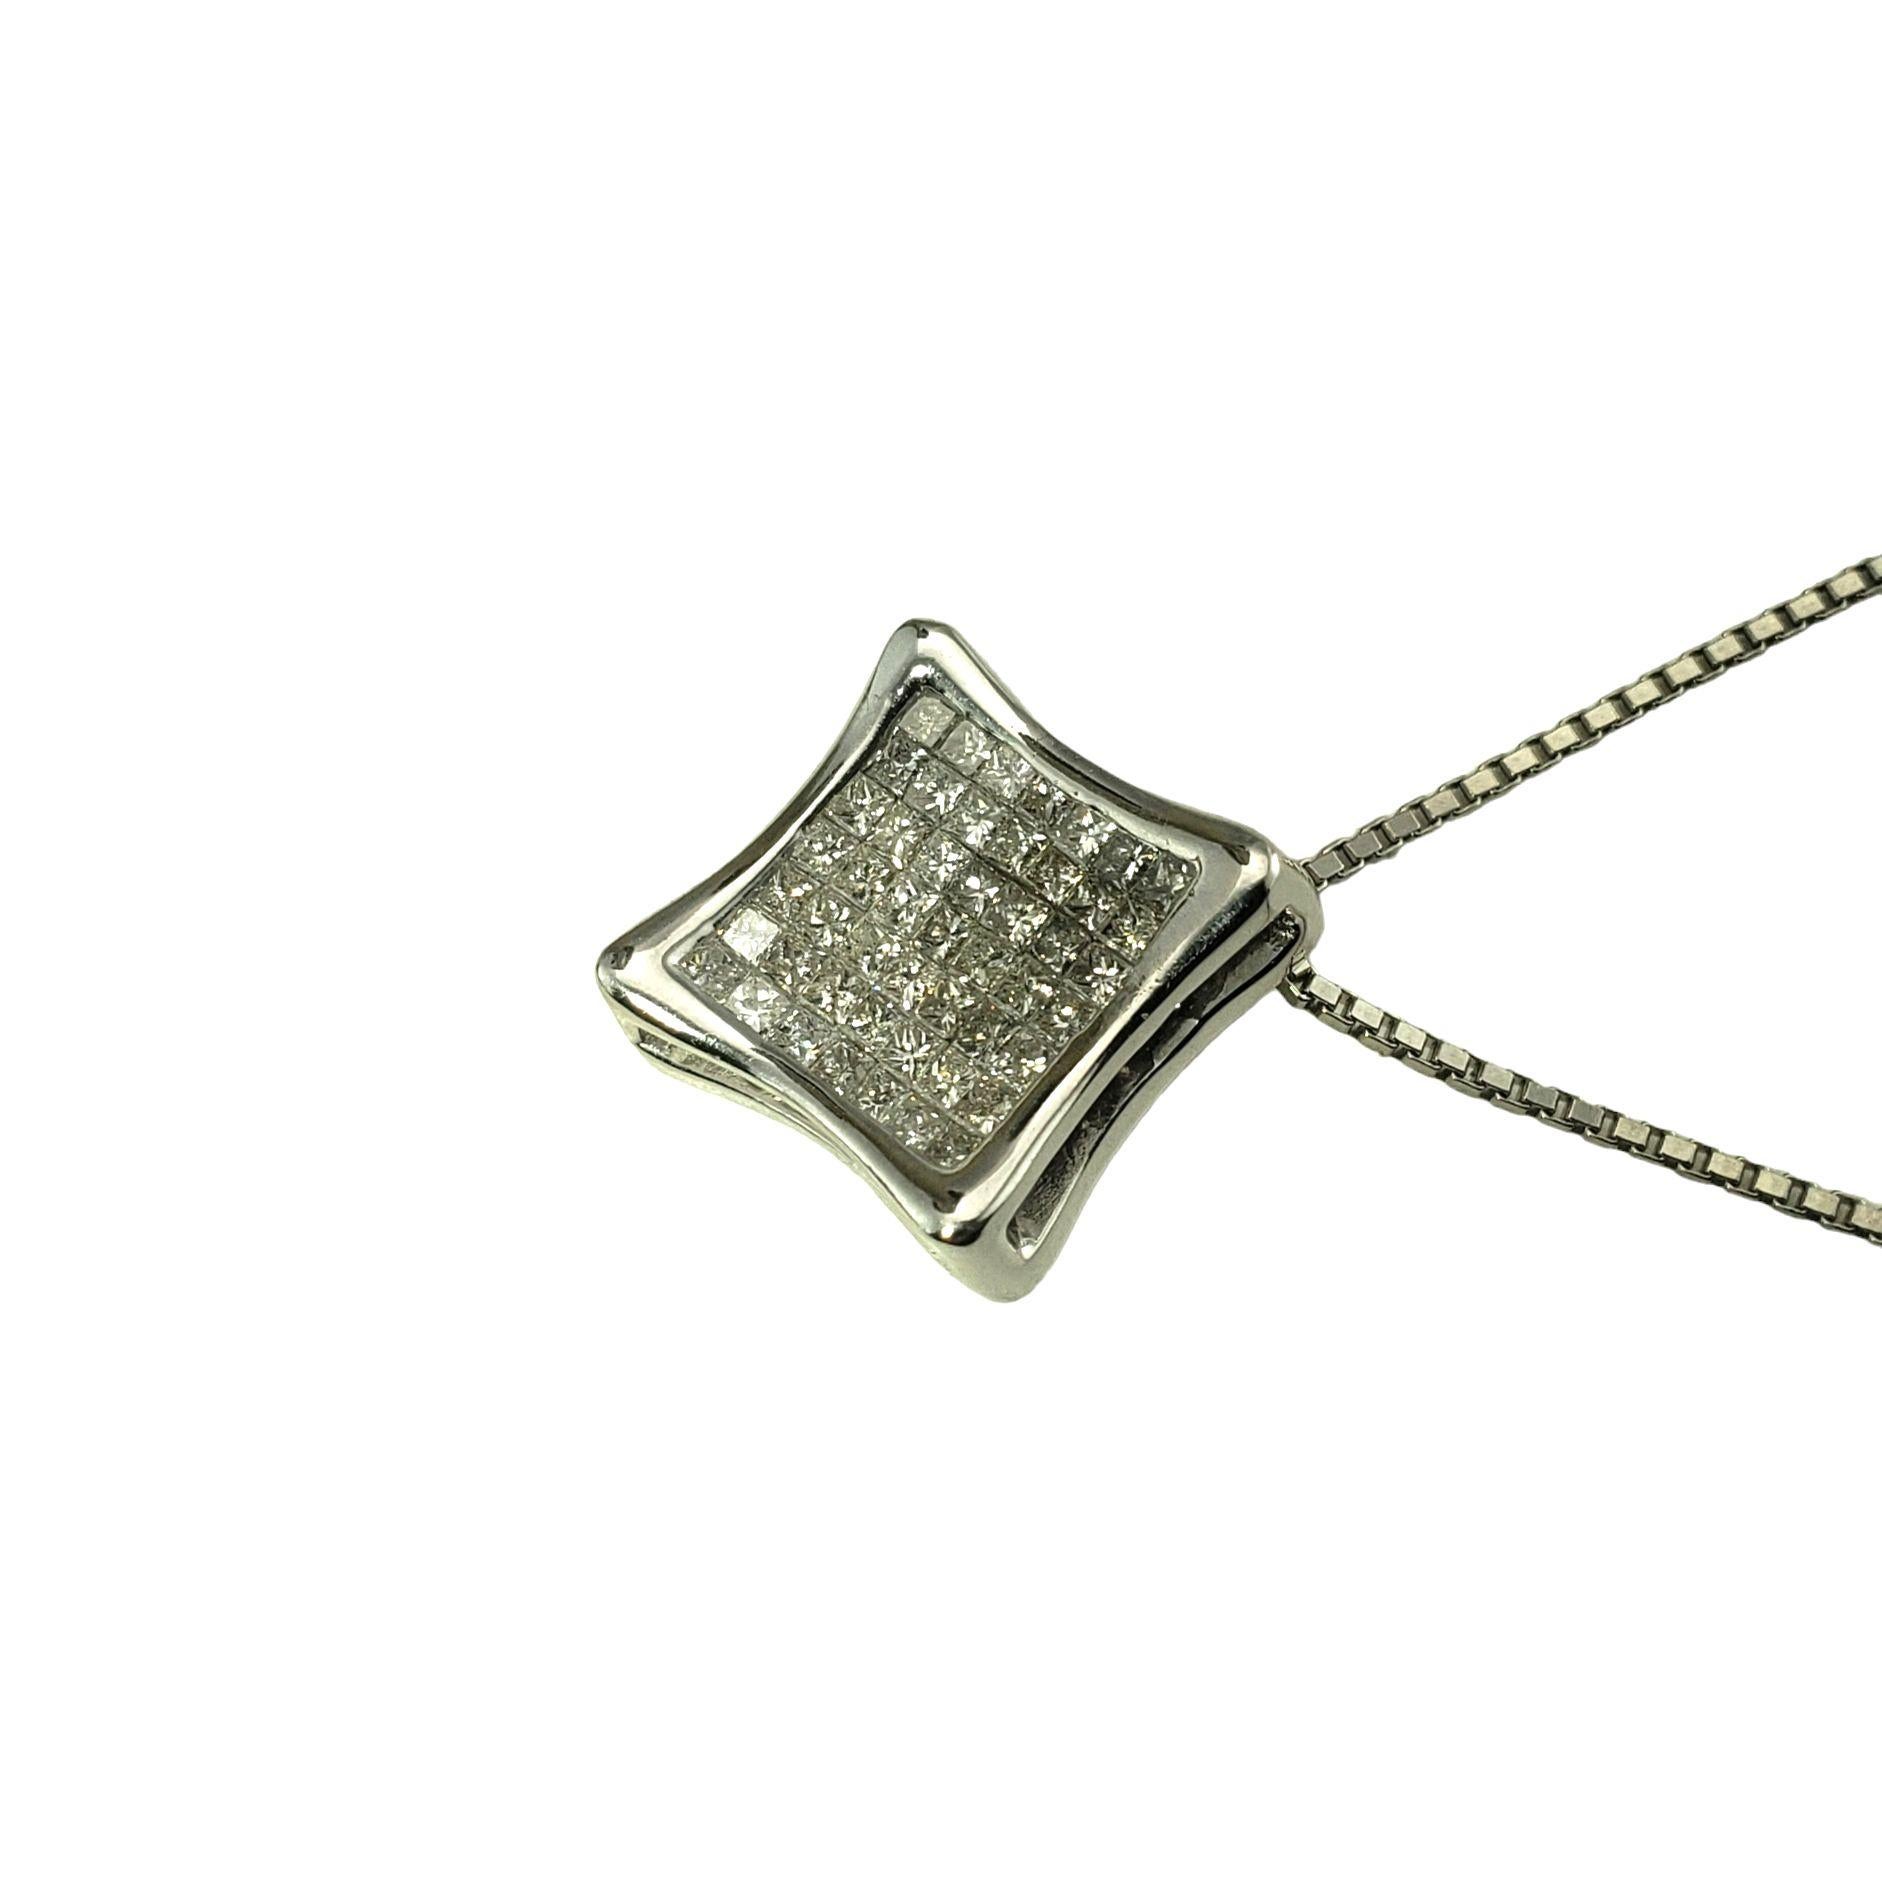 Vintage 14 Karat White Gold Diamond Pendant Necklace-

This sparkling pendant features 49 princess cut diamonds set in classic 14K white gold. Suspends from an elegant box chain necklace.

Approximate total diamond weight: 1.47 ct.

Diamond clarity: